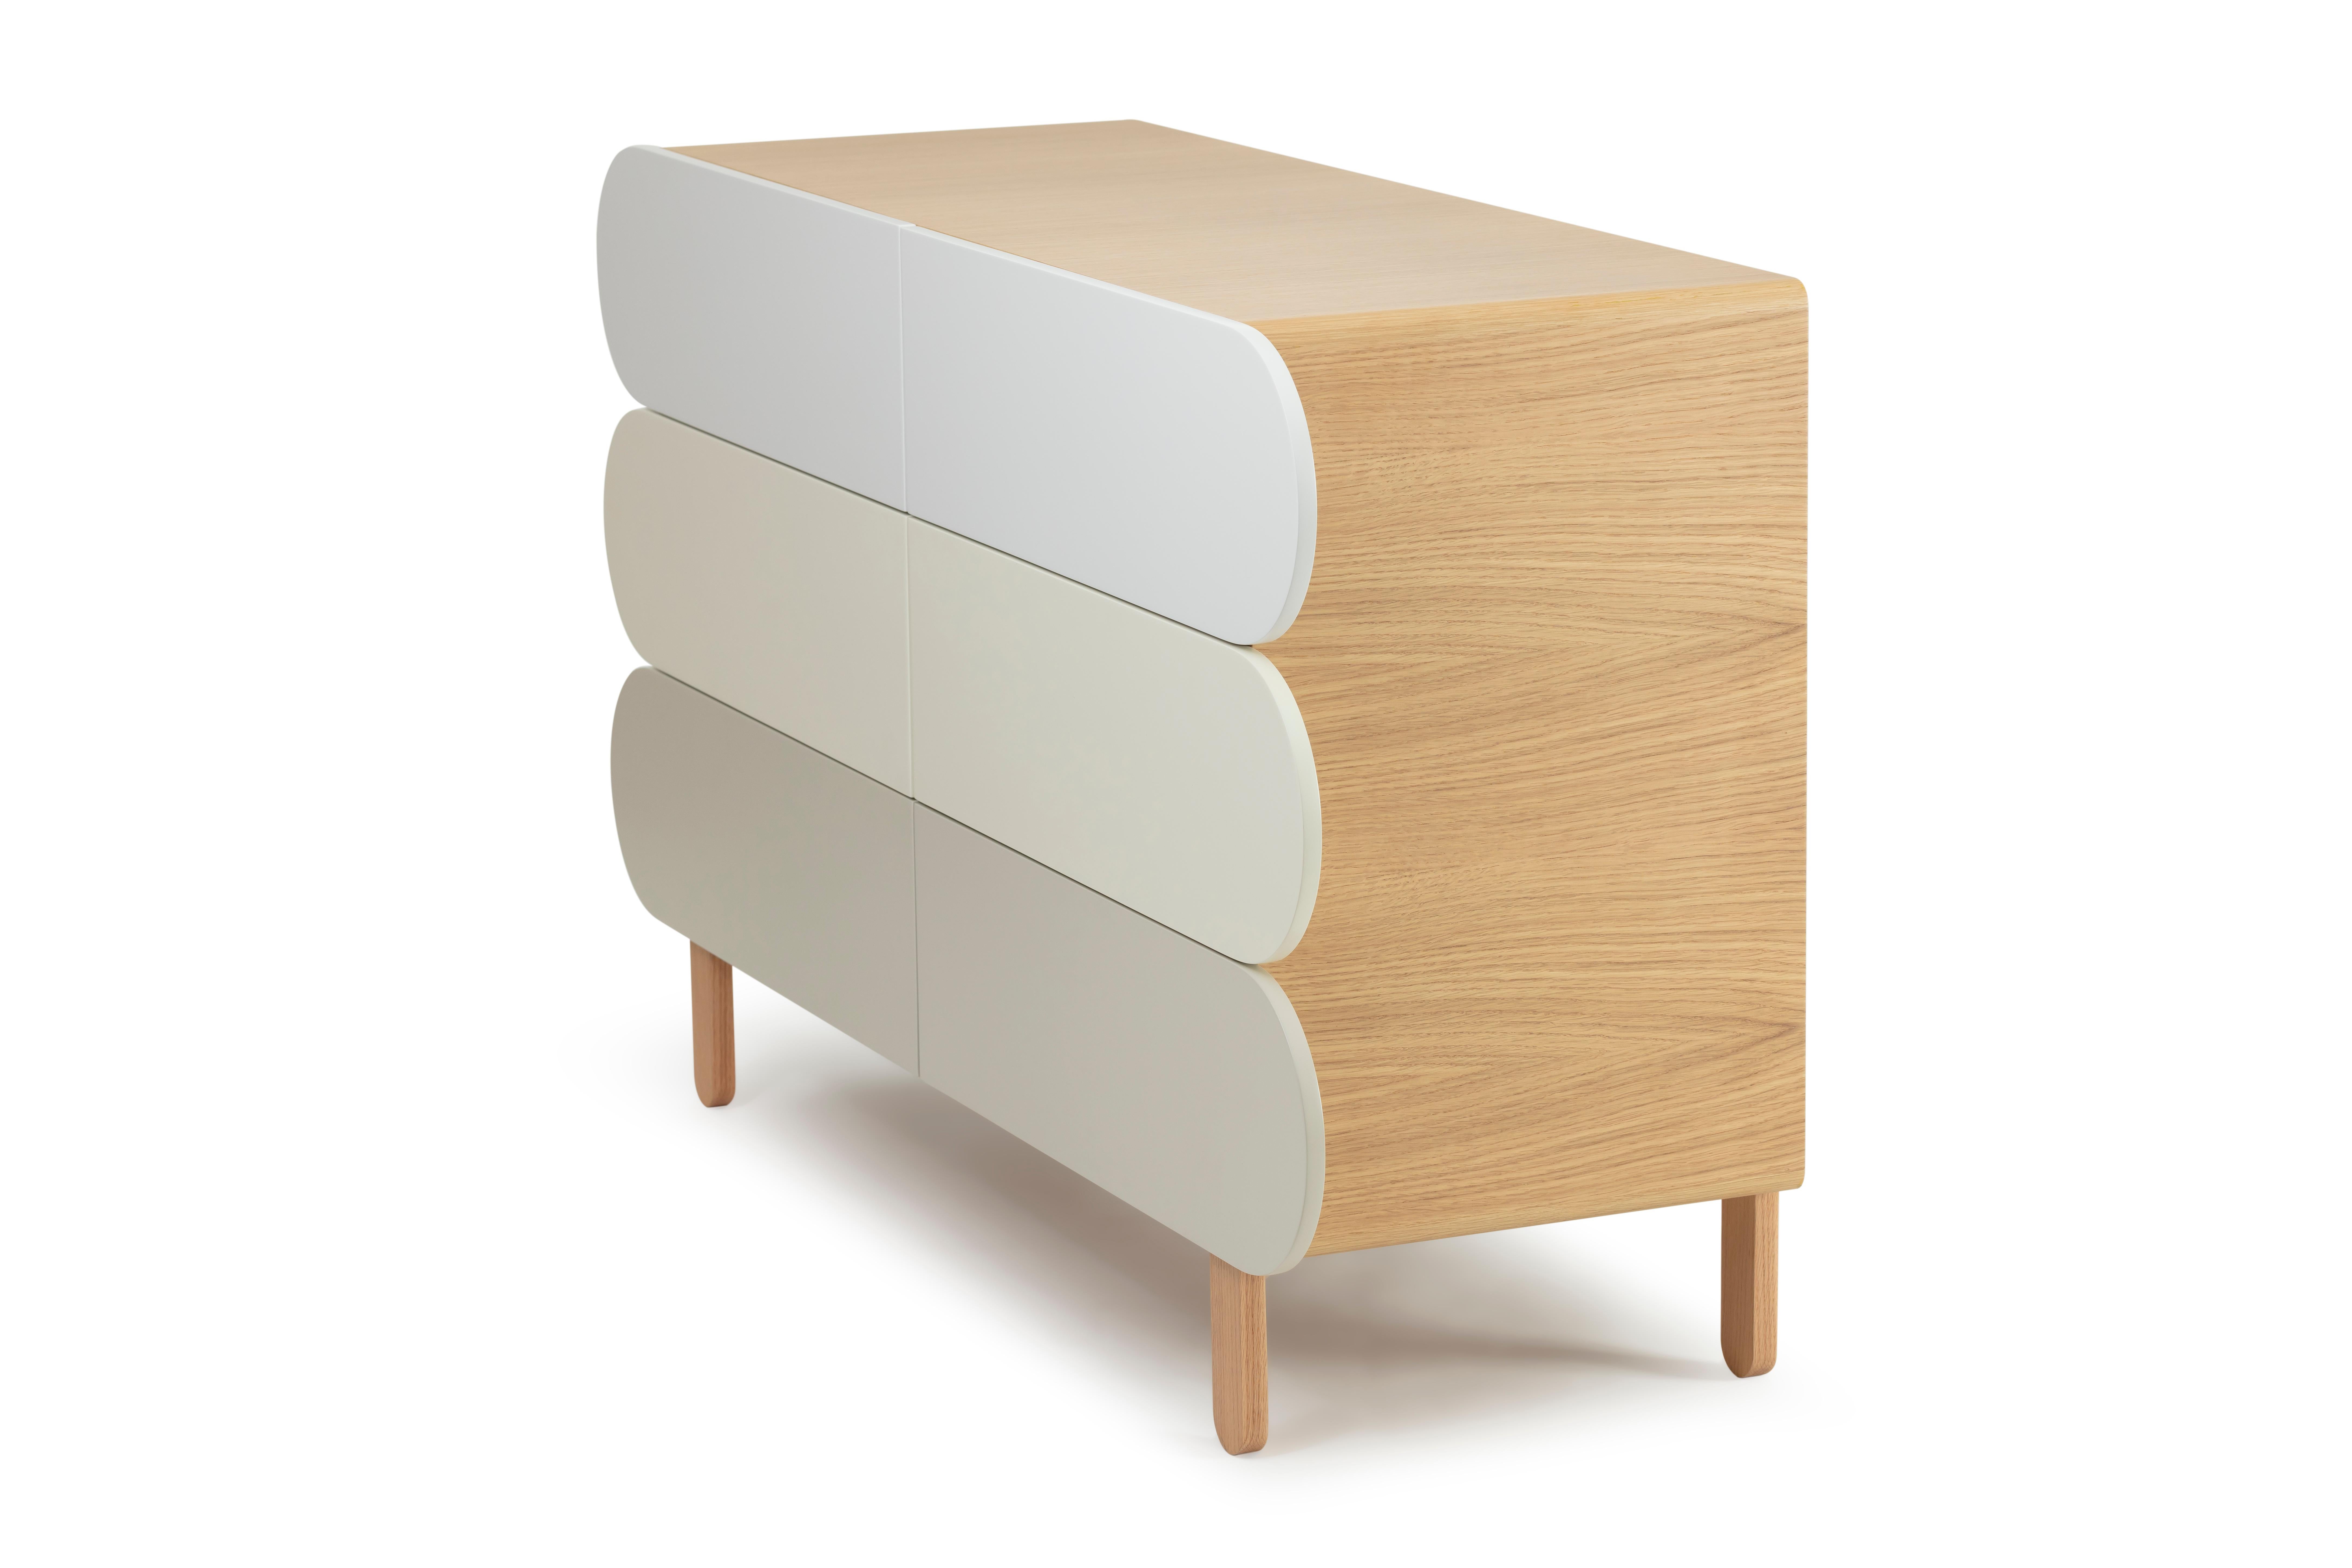 Crafted in wood veneer and a colorful facade, this modern dresser showcases an organic yet stylish silhouette flaunting straight clean lines. Six drawers open to reveal generous storage space to stow your everyday essentials in a covert fashion.